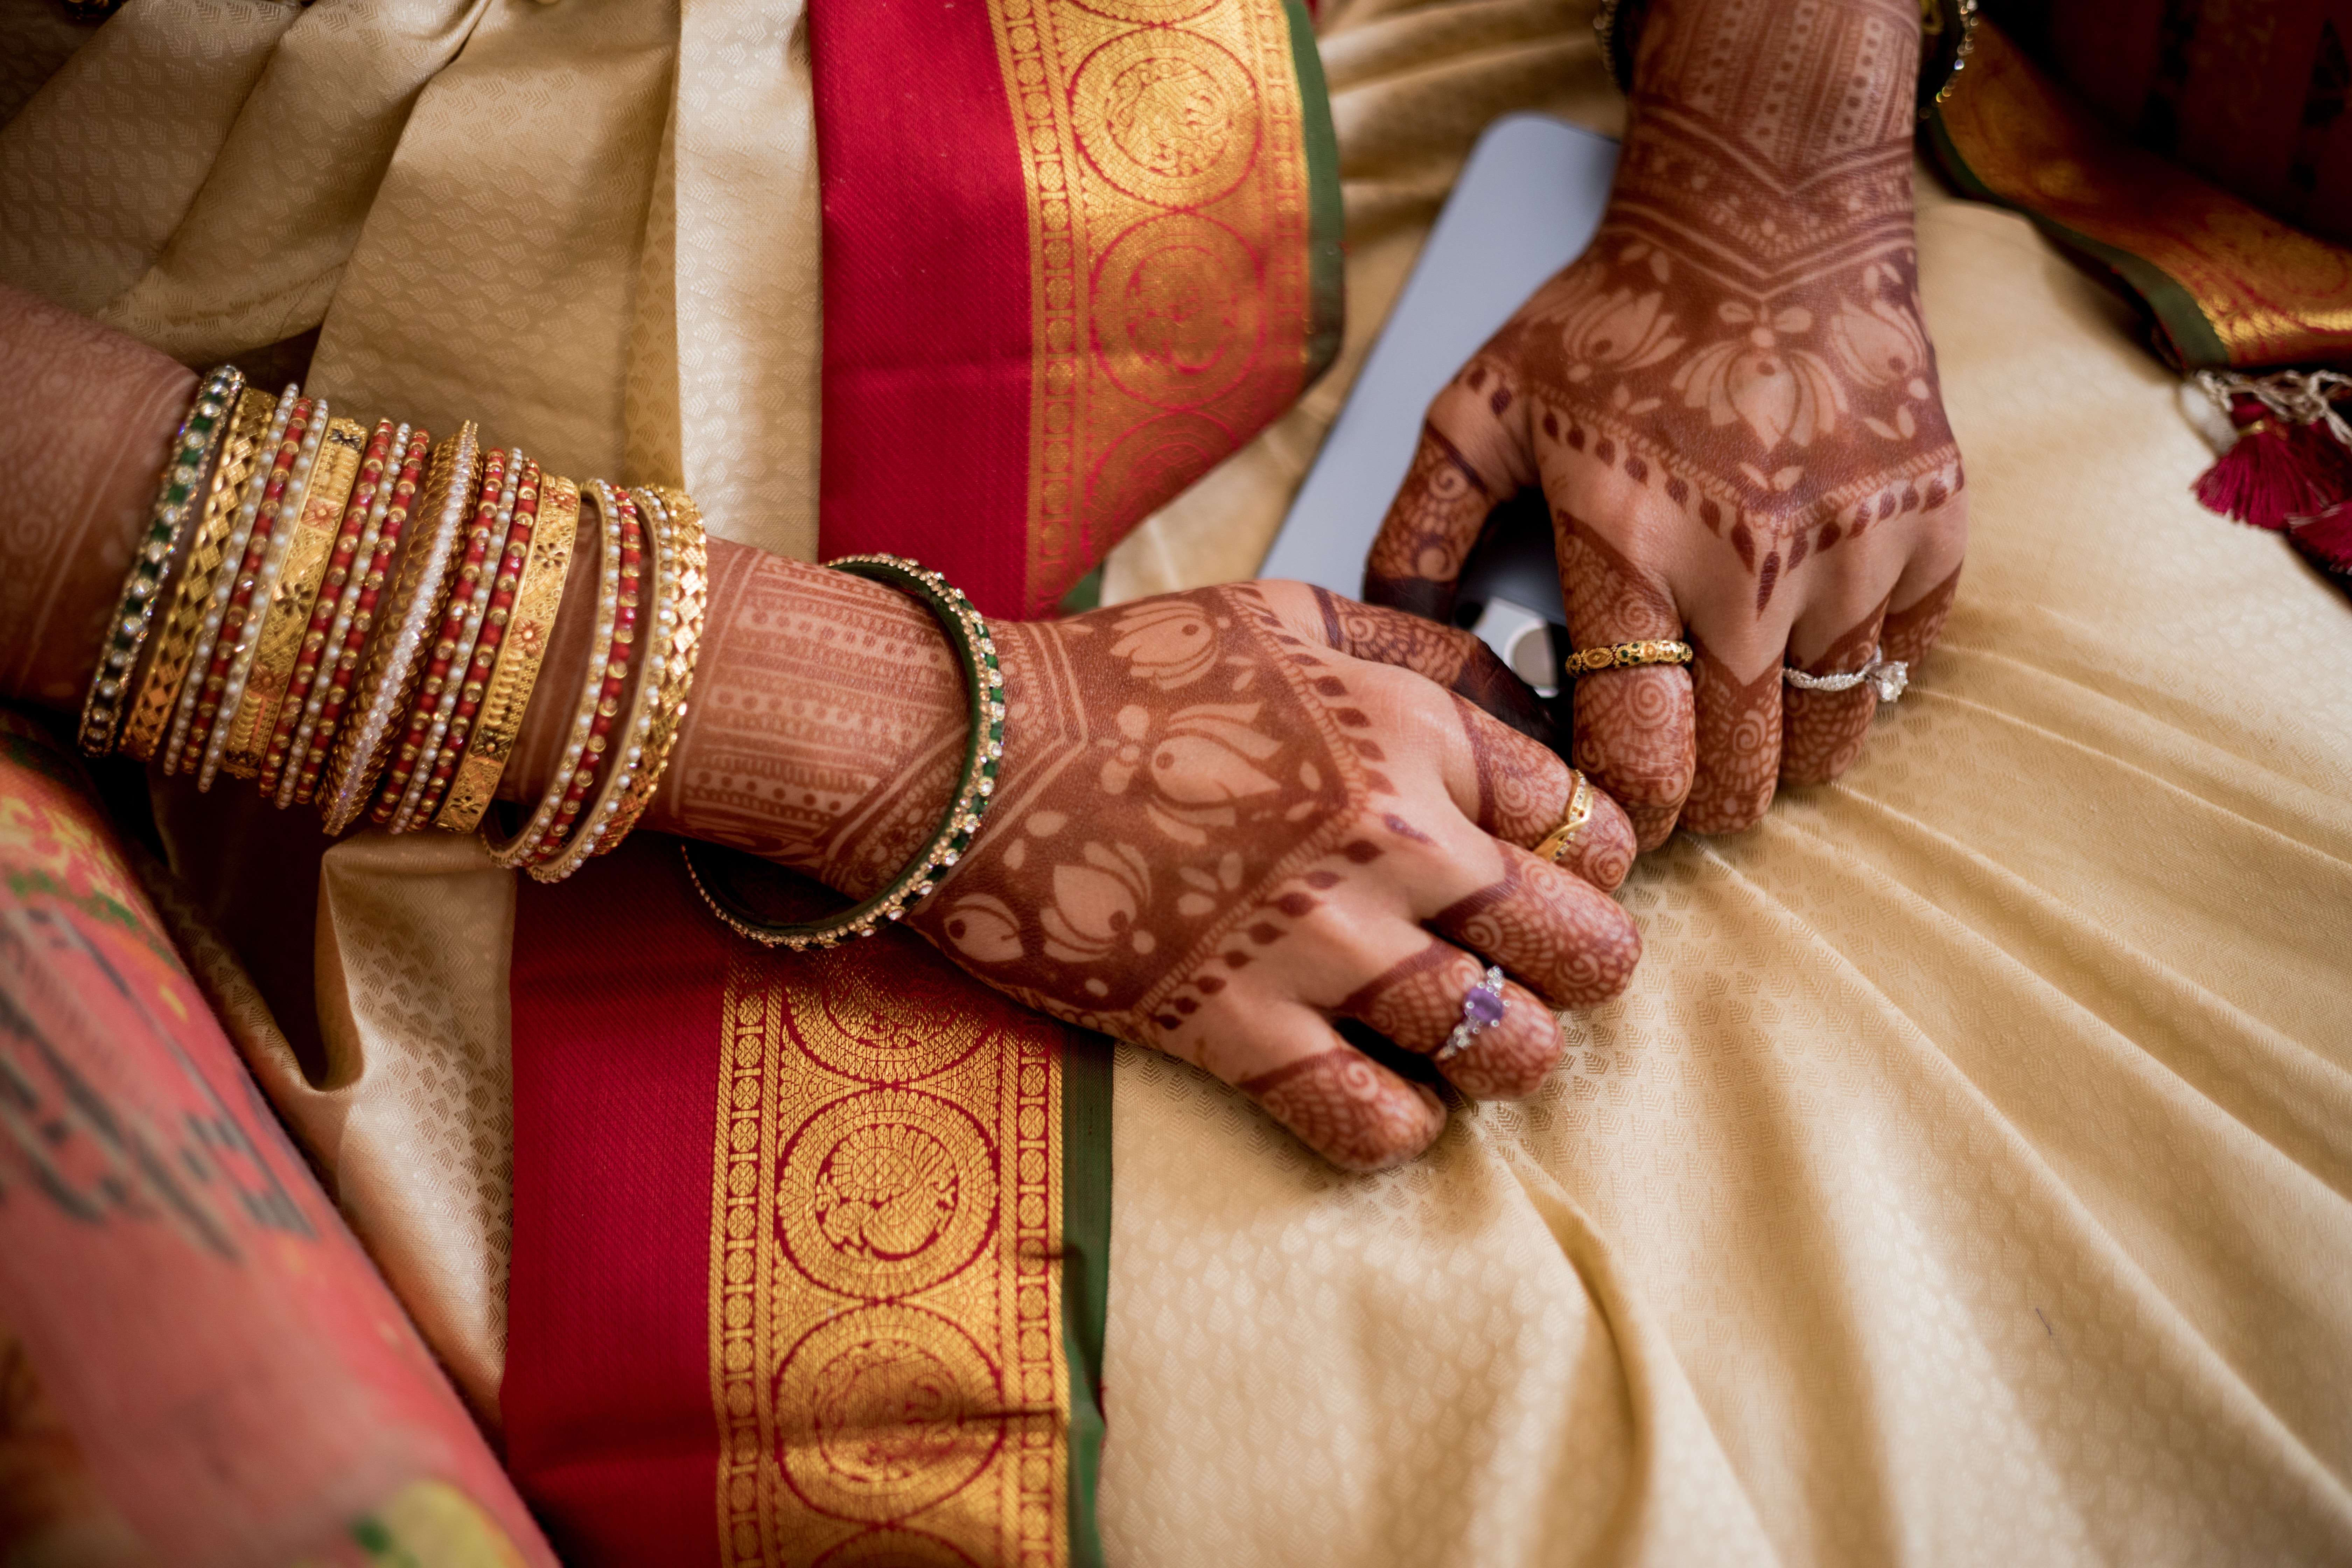 Wedding planners in Bangalore